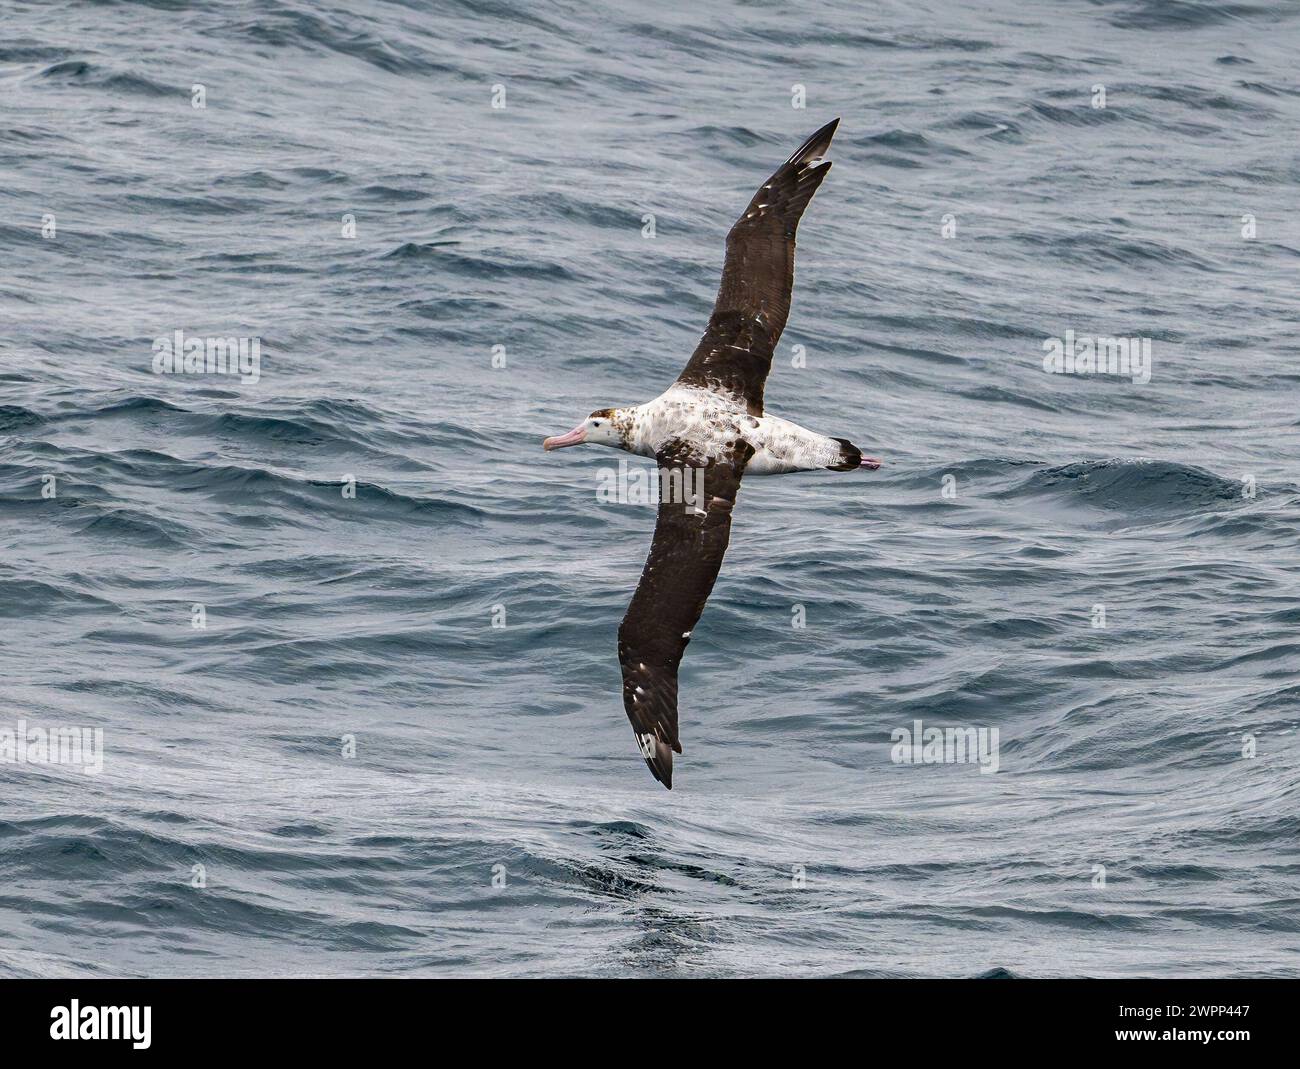 An Antipodean Albatross (Diomedea antipodensis) flying over ocean. Pacific Ocean, off the coast of Chile. Stock Photo